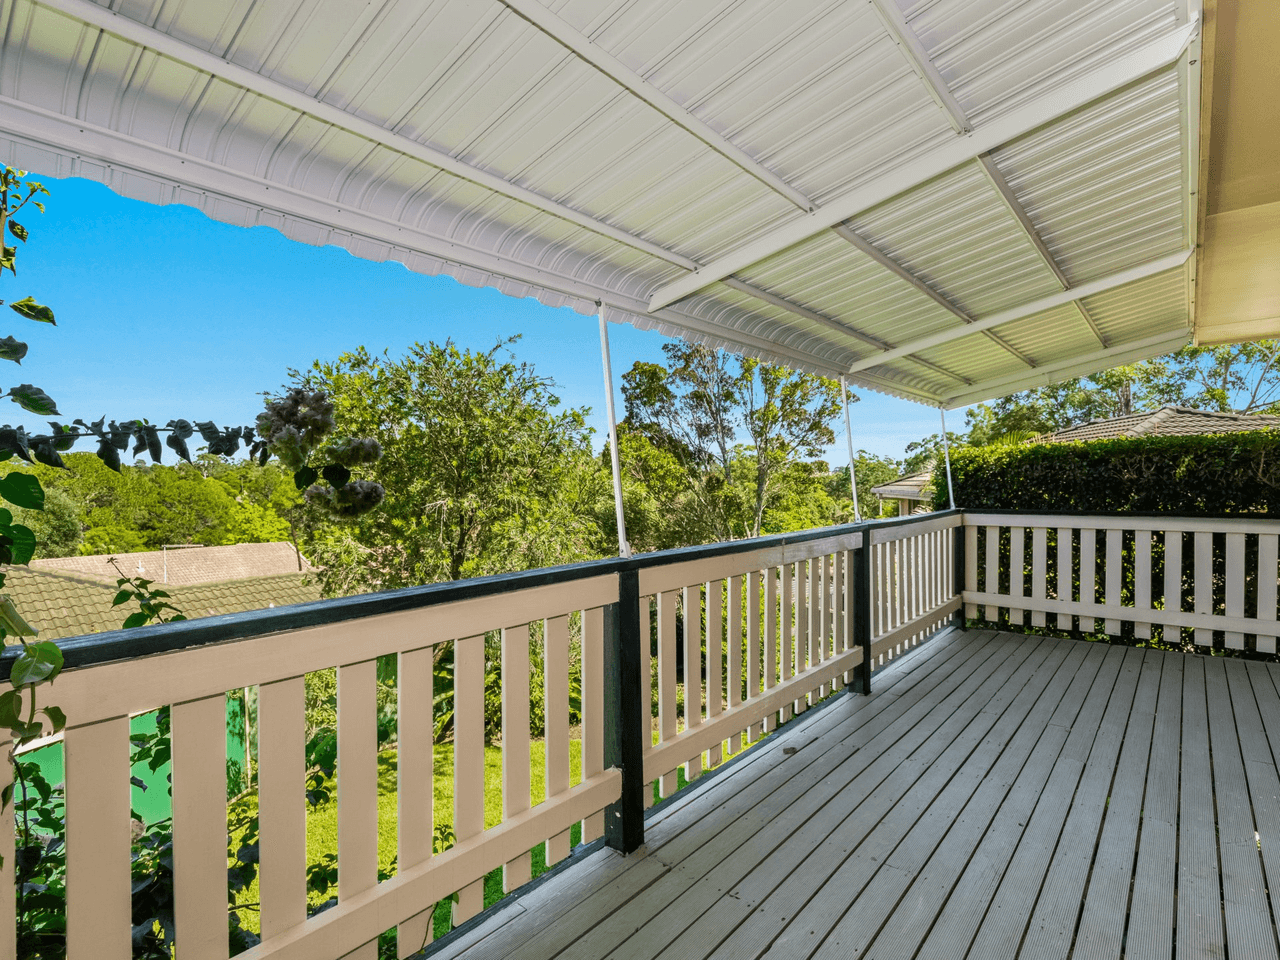 2/6 Kingfisher Place, GOONELLABAH, NSW 2480